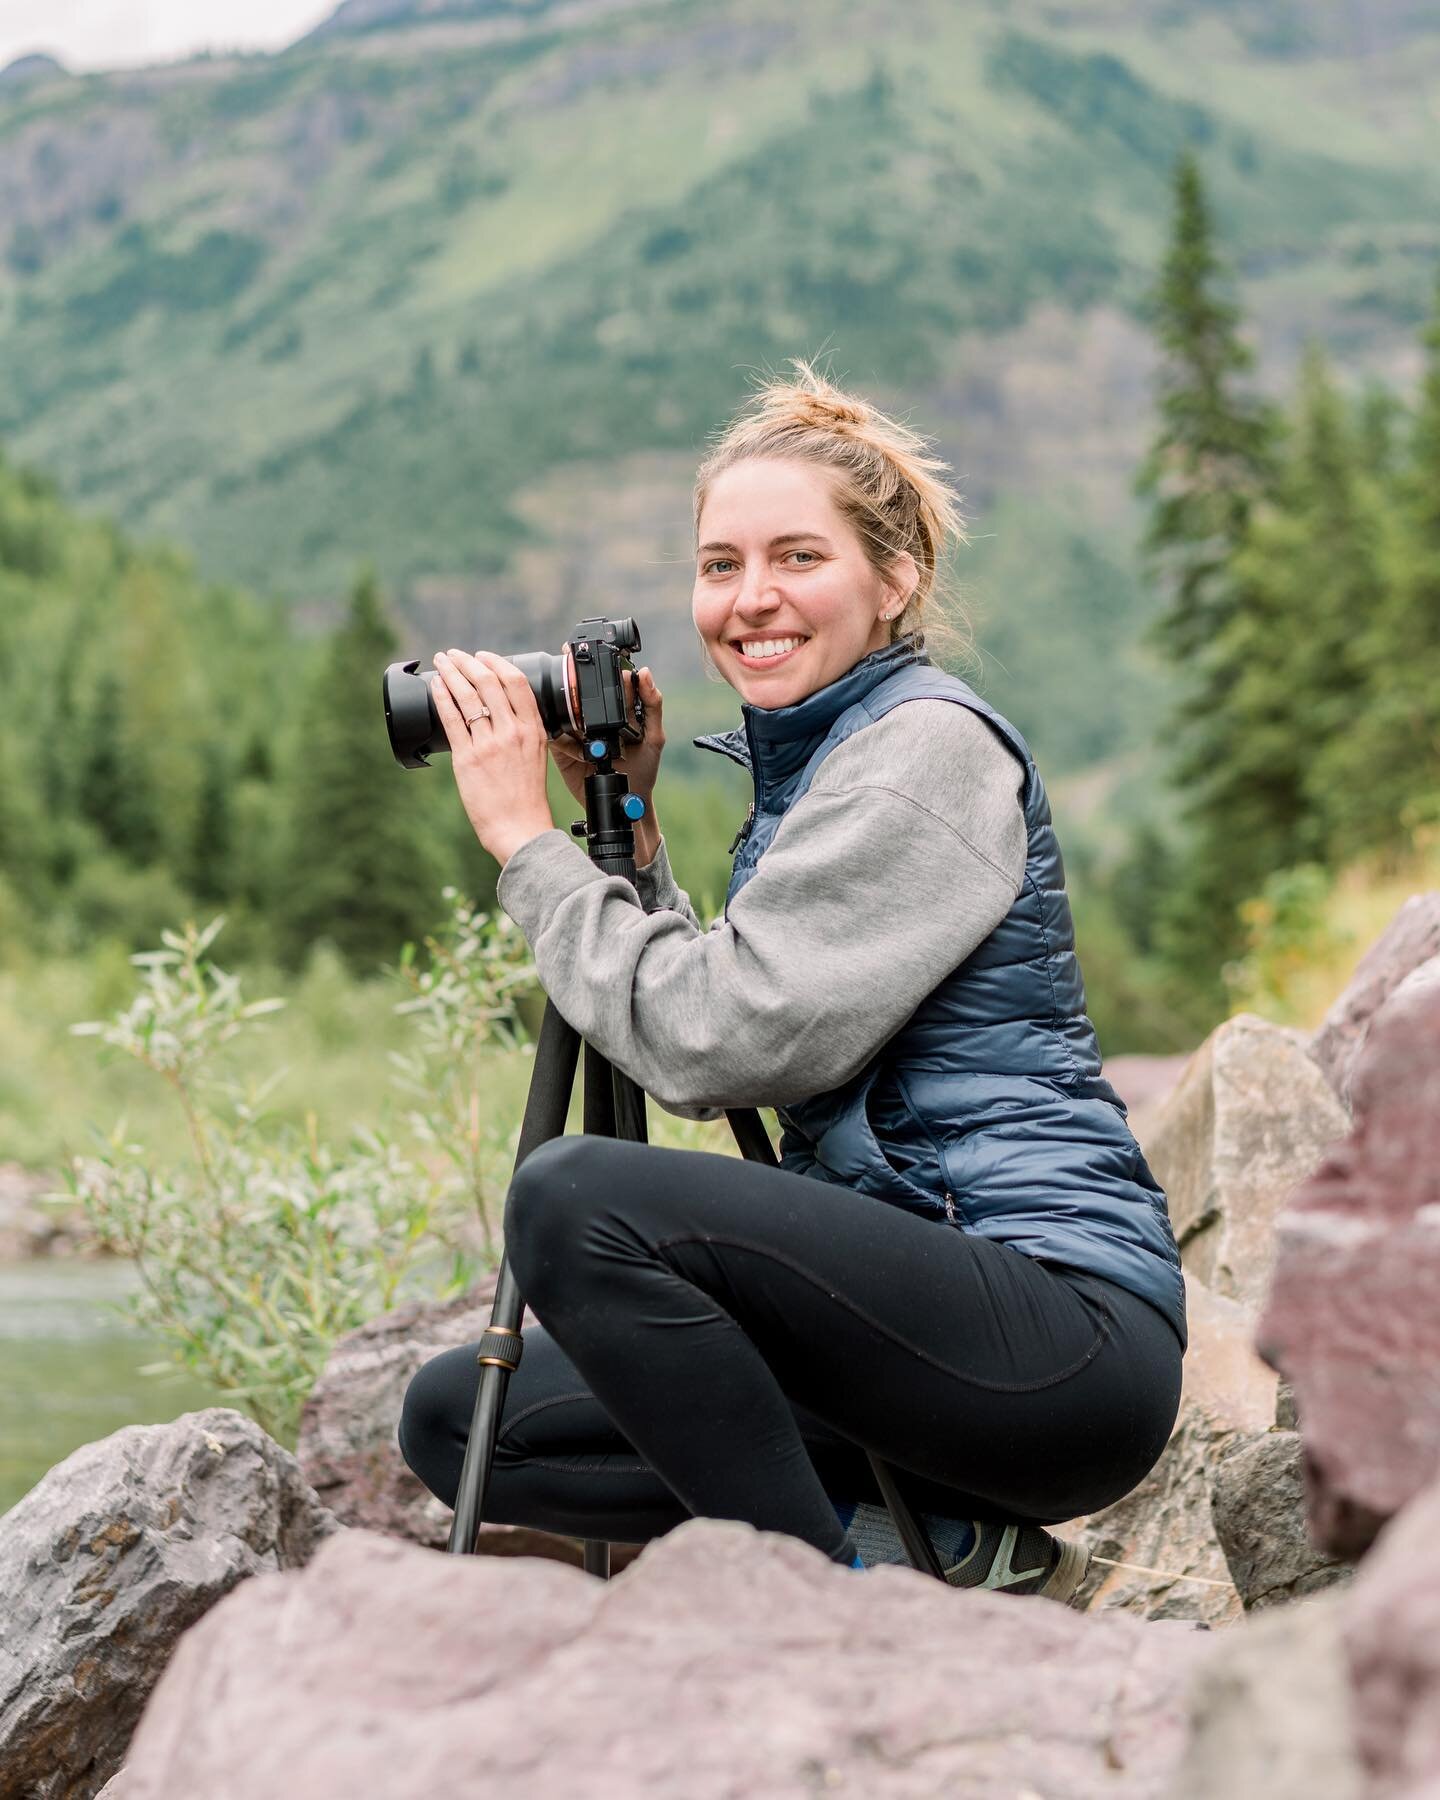 Introducing co-owner of Compass Studios, Katie! In addition to shooting, Katie takes care of everything backend for the business: creative vision, editing, emails, calls, scheduling, and more. 
Her hobbies include travel, live music, nature, cooking,